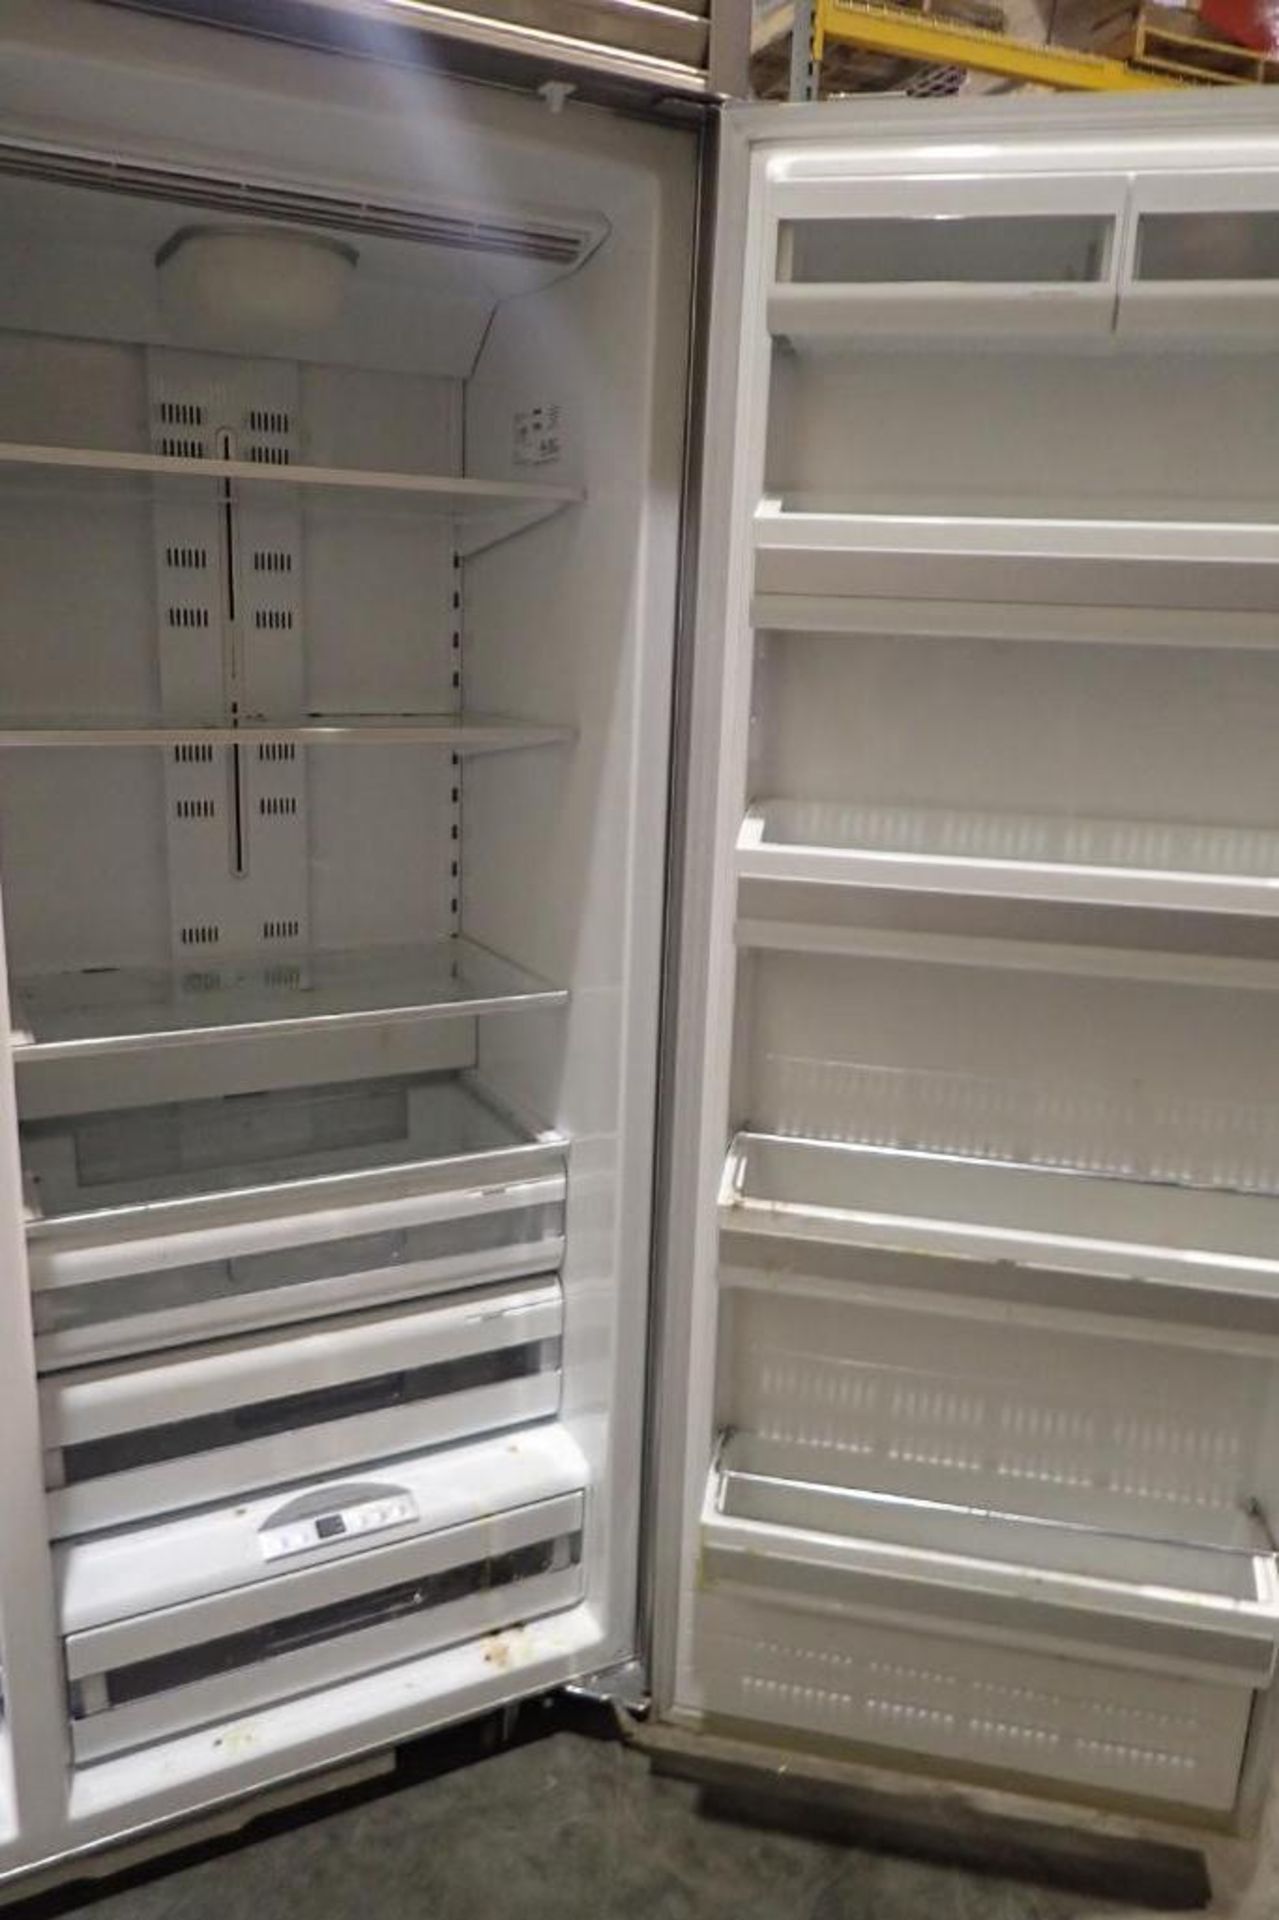 Kenmore pro SS refrigerator and freezer french door combo - Image 6 of 9